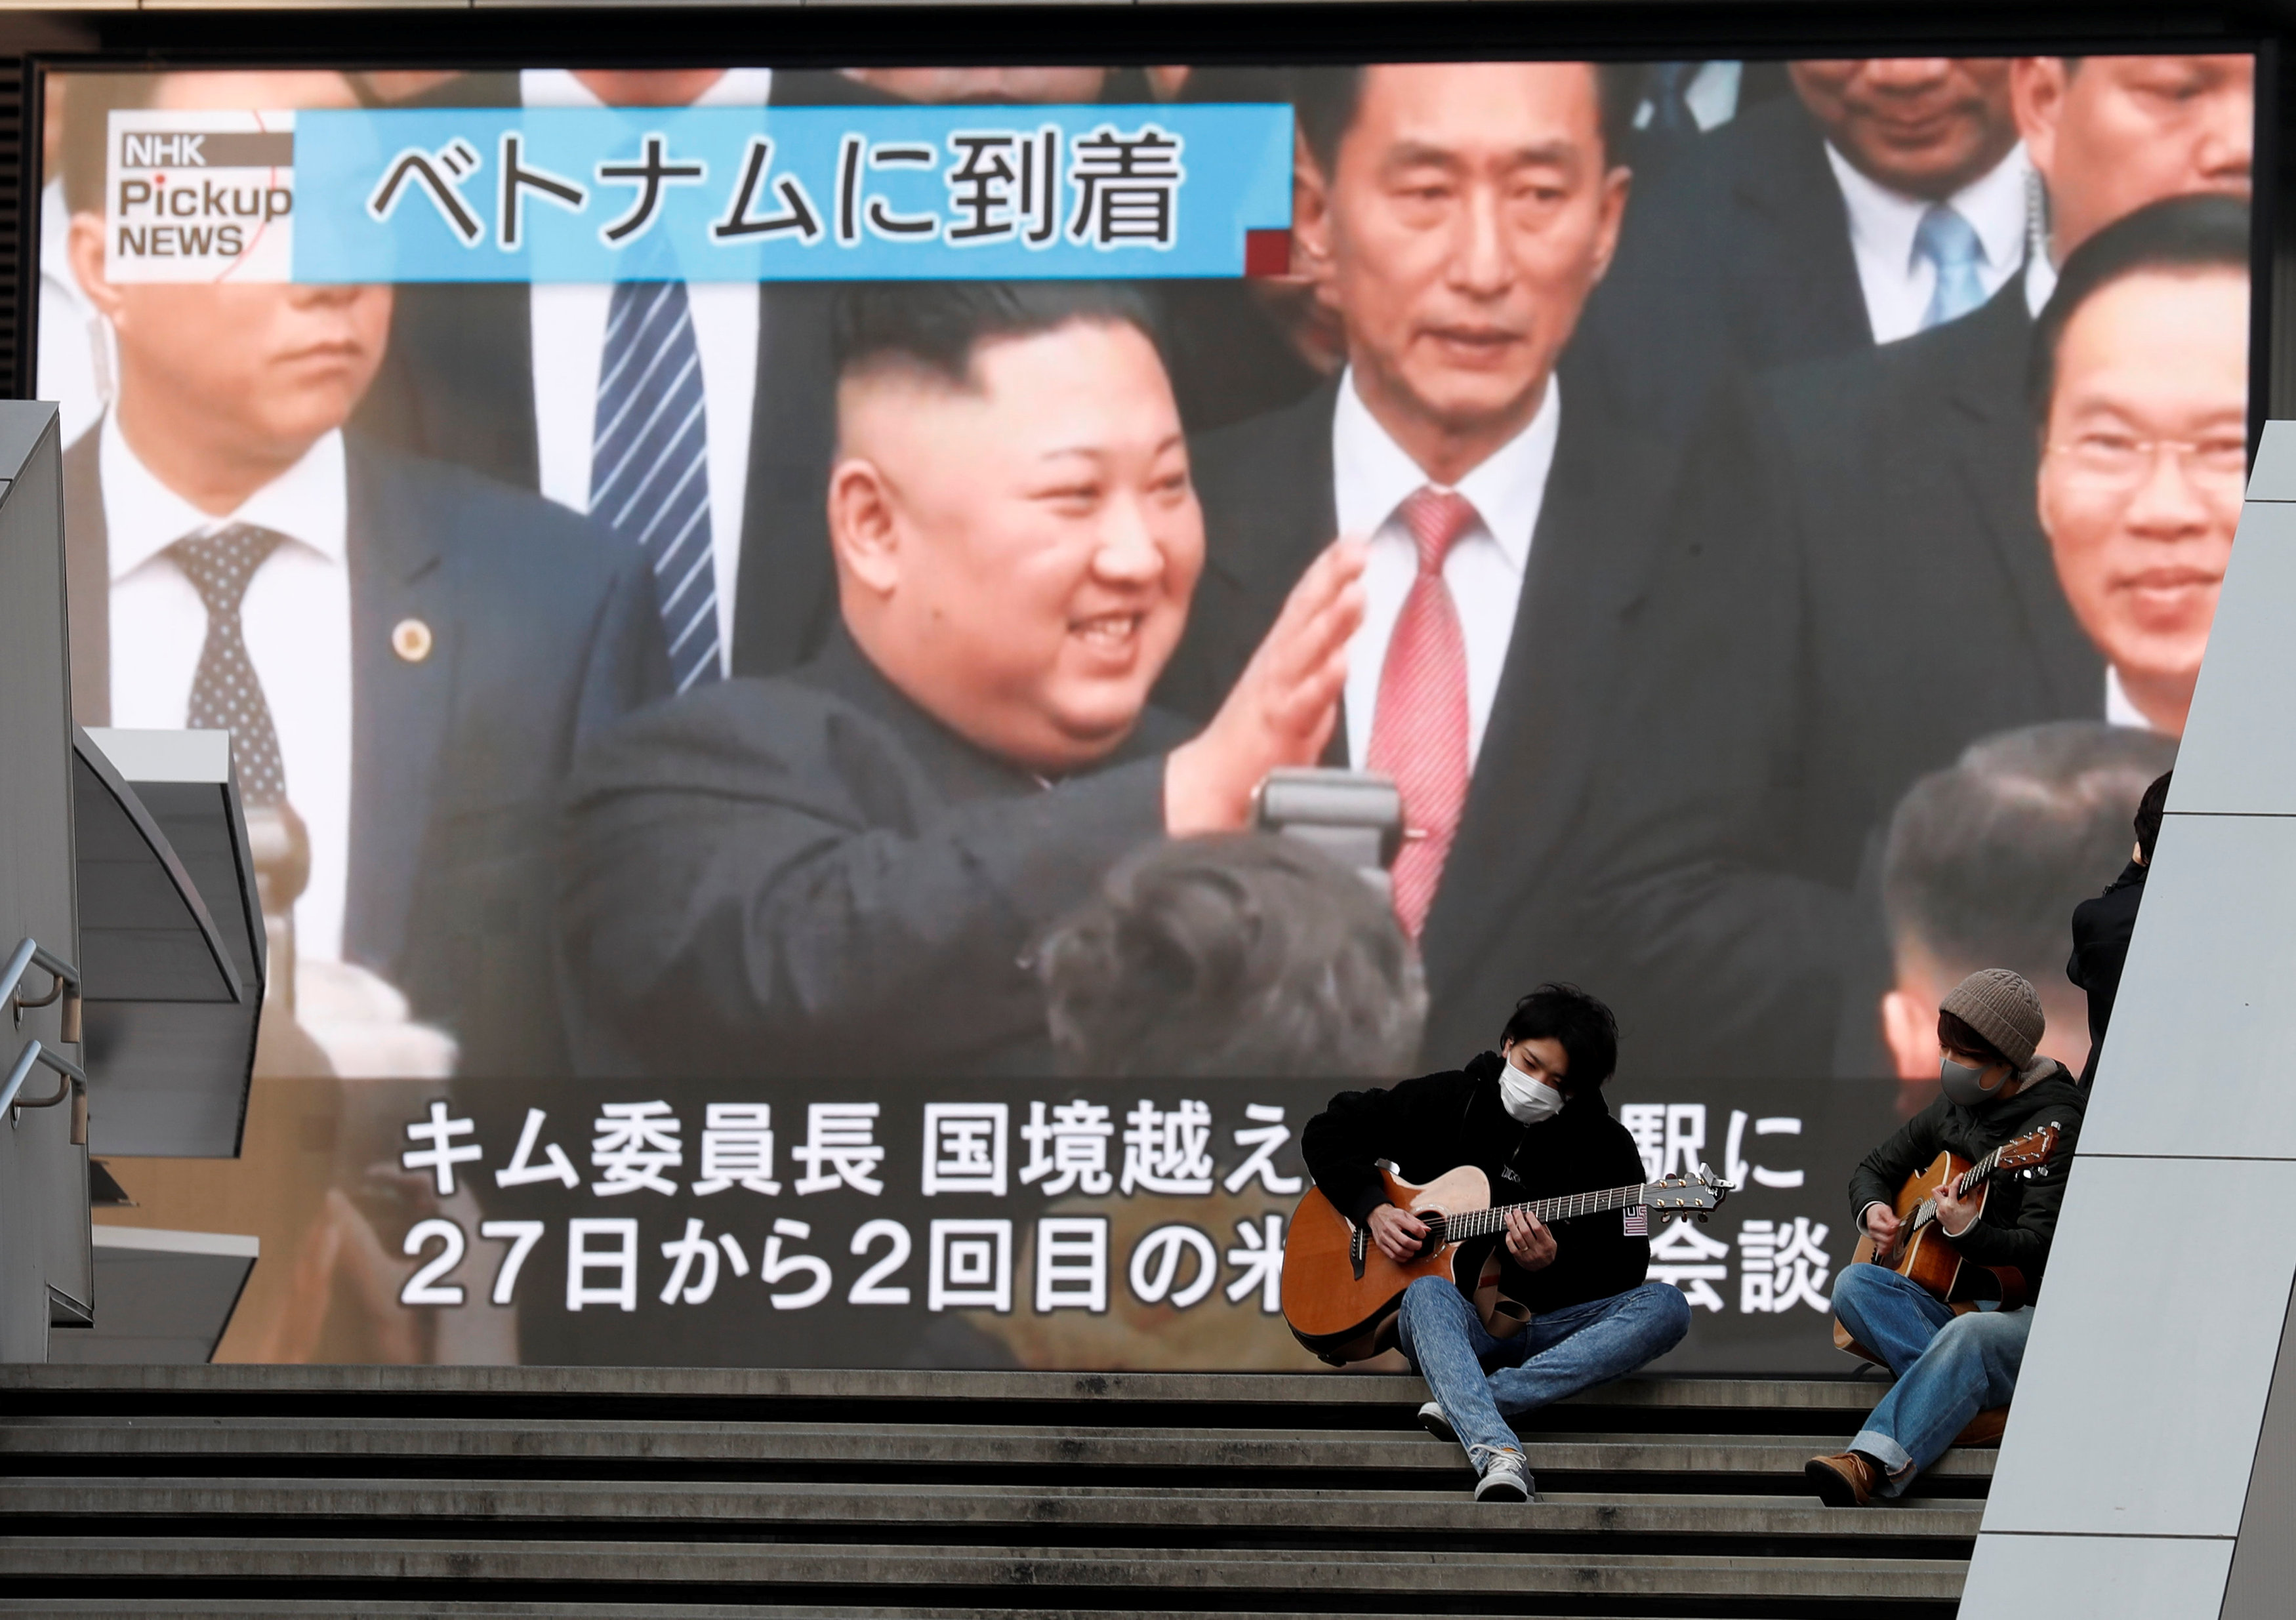 Men play guitars in front of a huge screen broadcasting North Korea's leader Kim Jong Un's arrival in Vietnam for the upcoming summit with U.S. President Donald Trump, in Tokyo